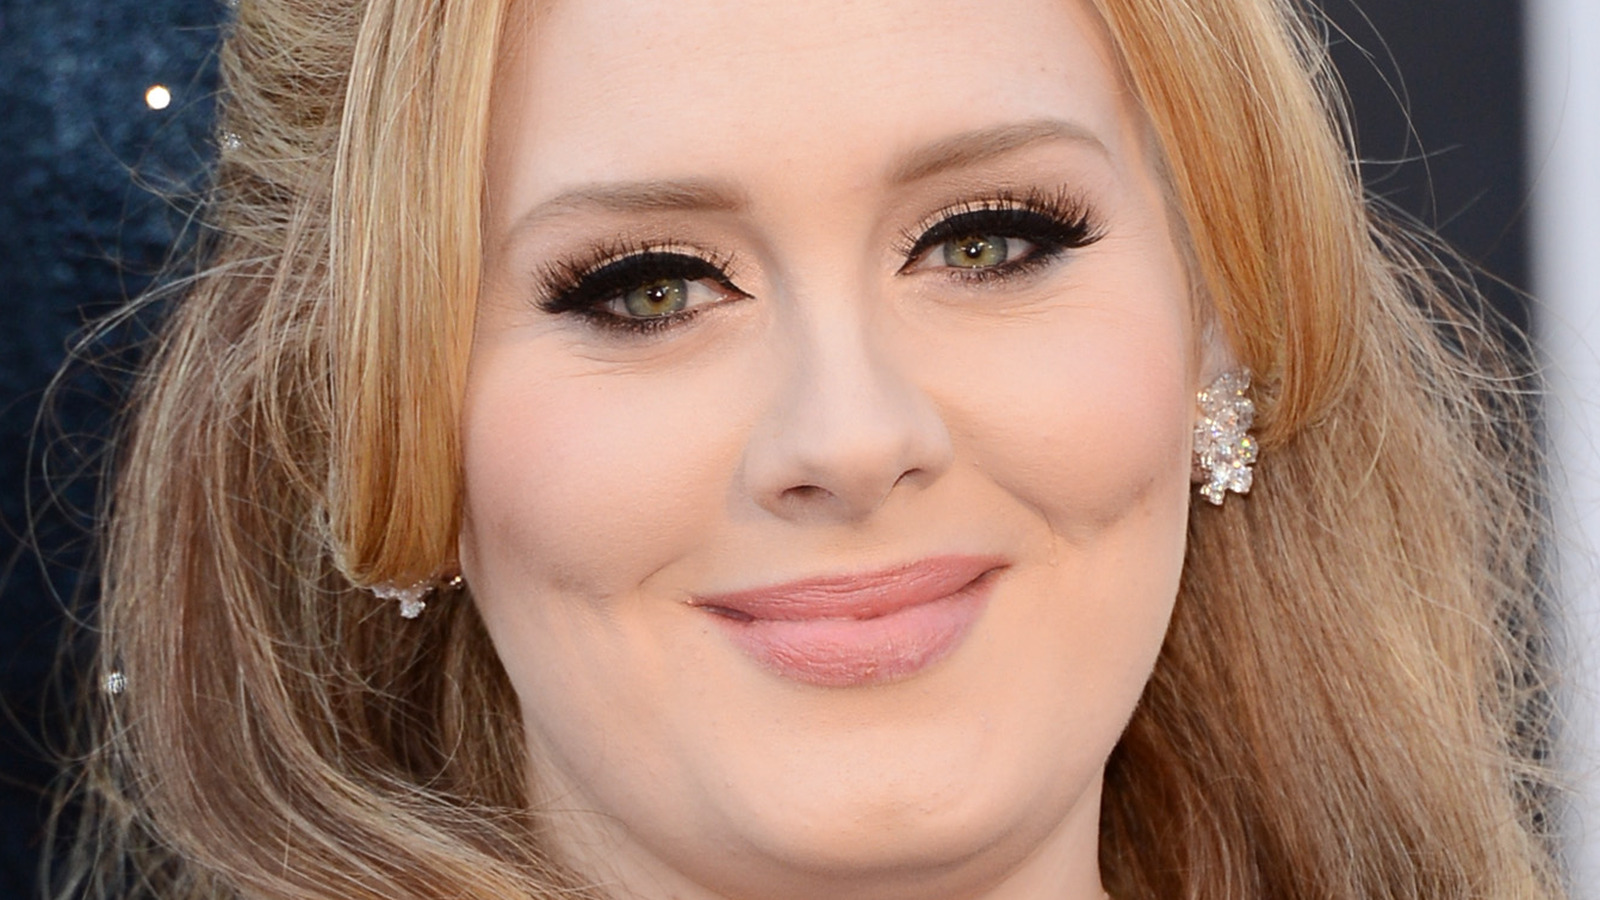 Spotify to Do What Adele Did for Her New Album